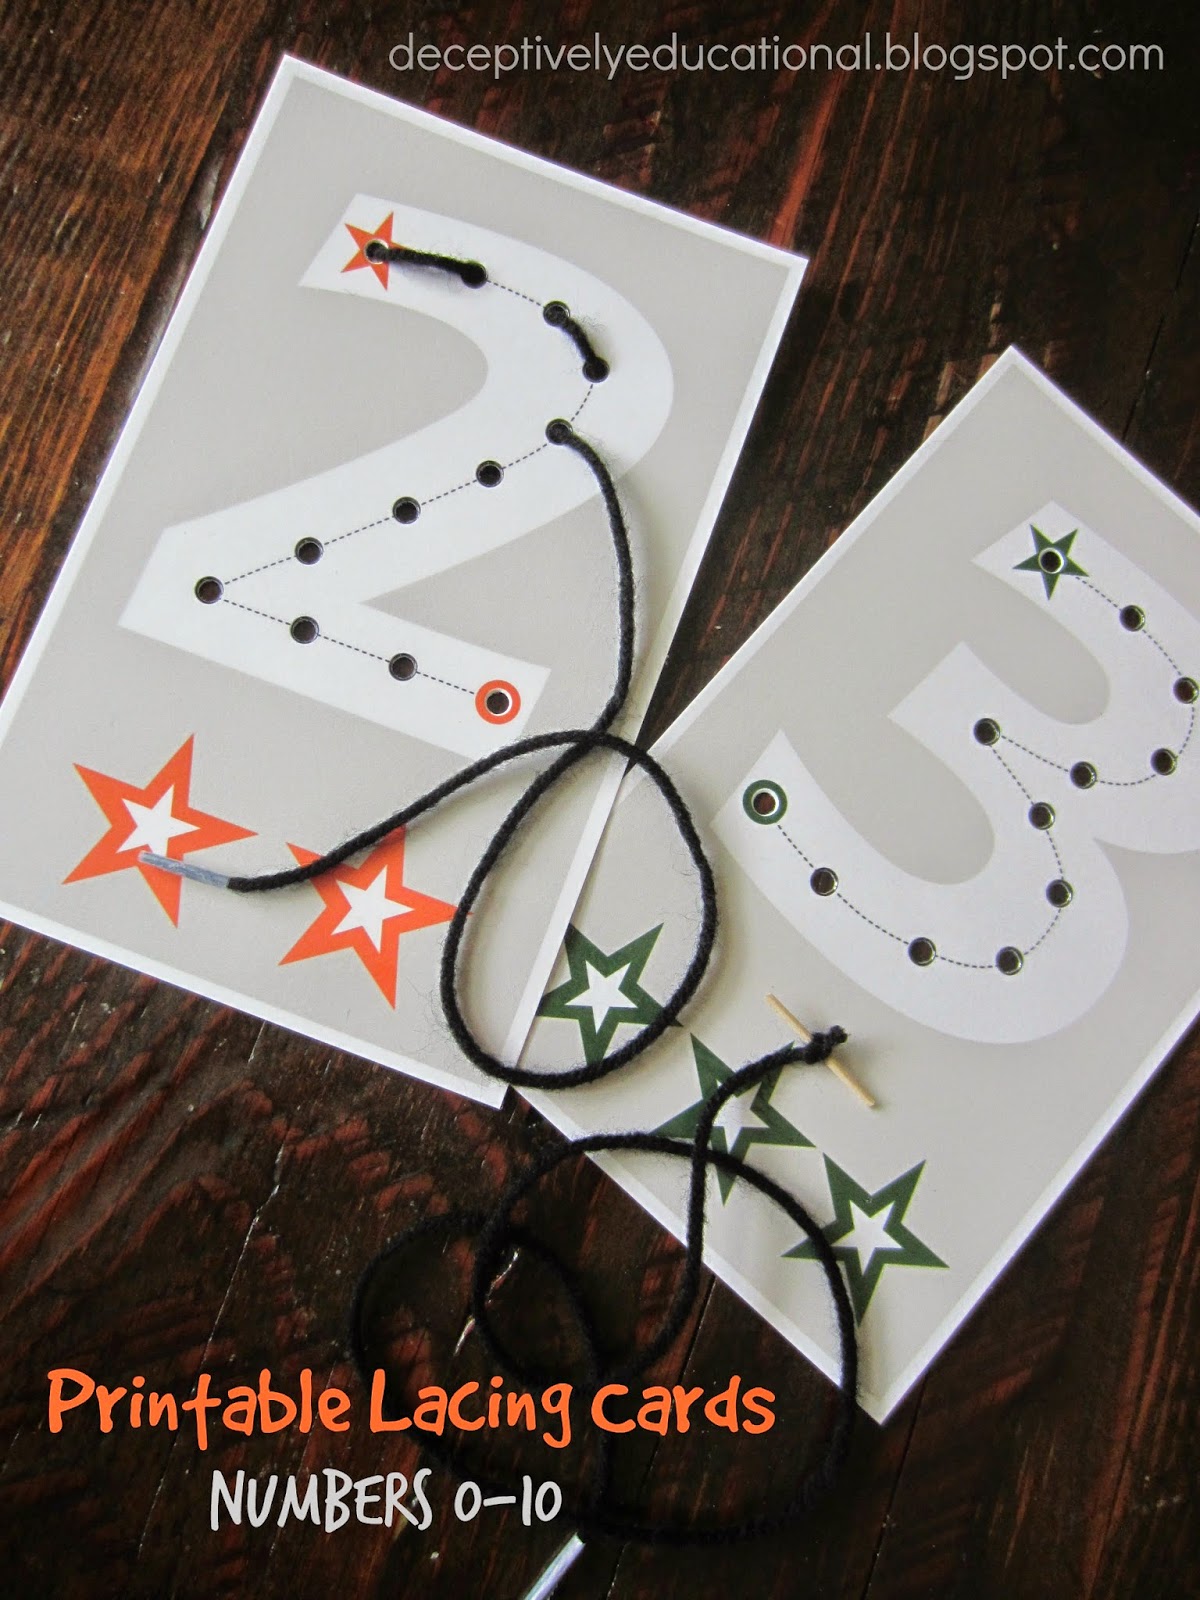 relentlessly-fun-deceptively-educational-printable-lacing-cards